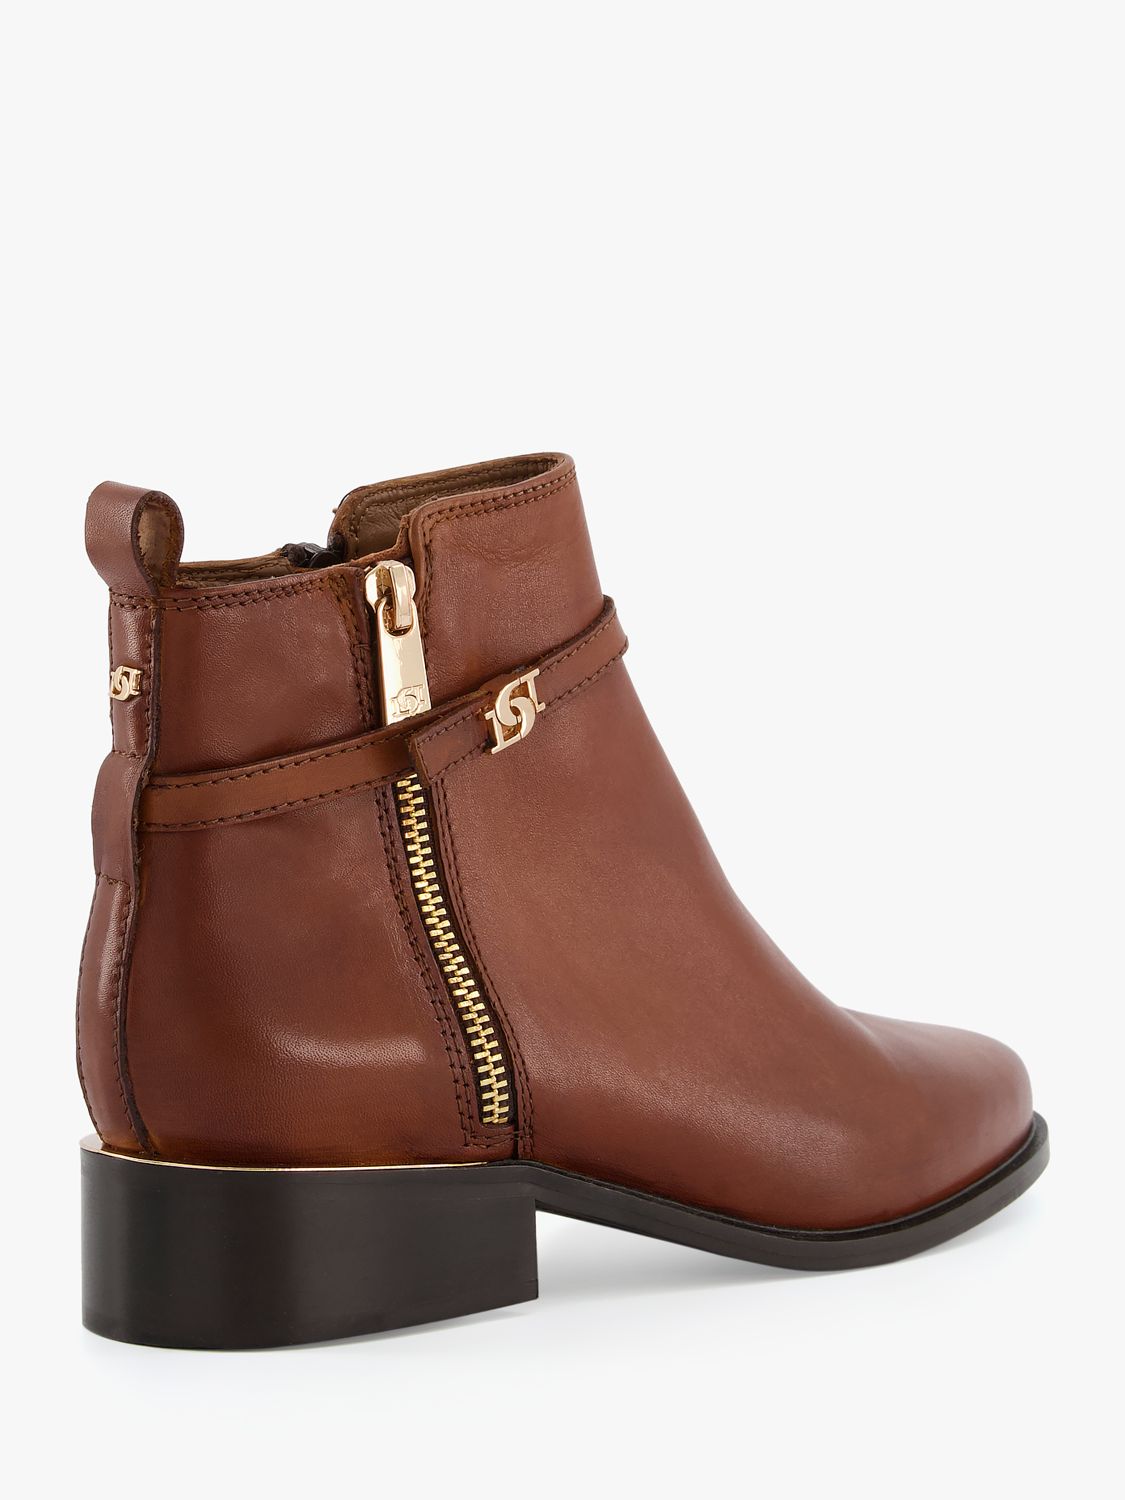 Buy Dune Wide Fit Pap Leather Ankle Boots Online at johnlewis.com